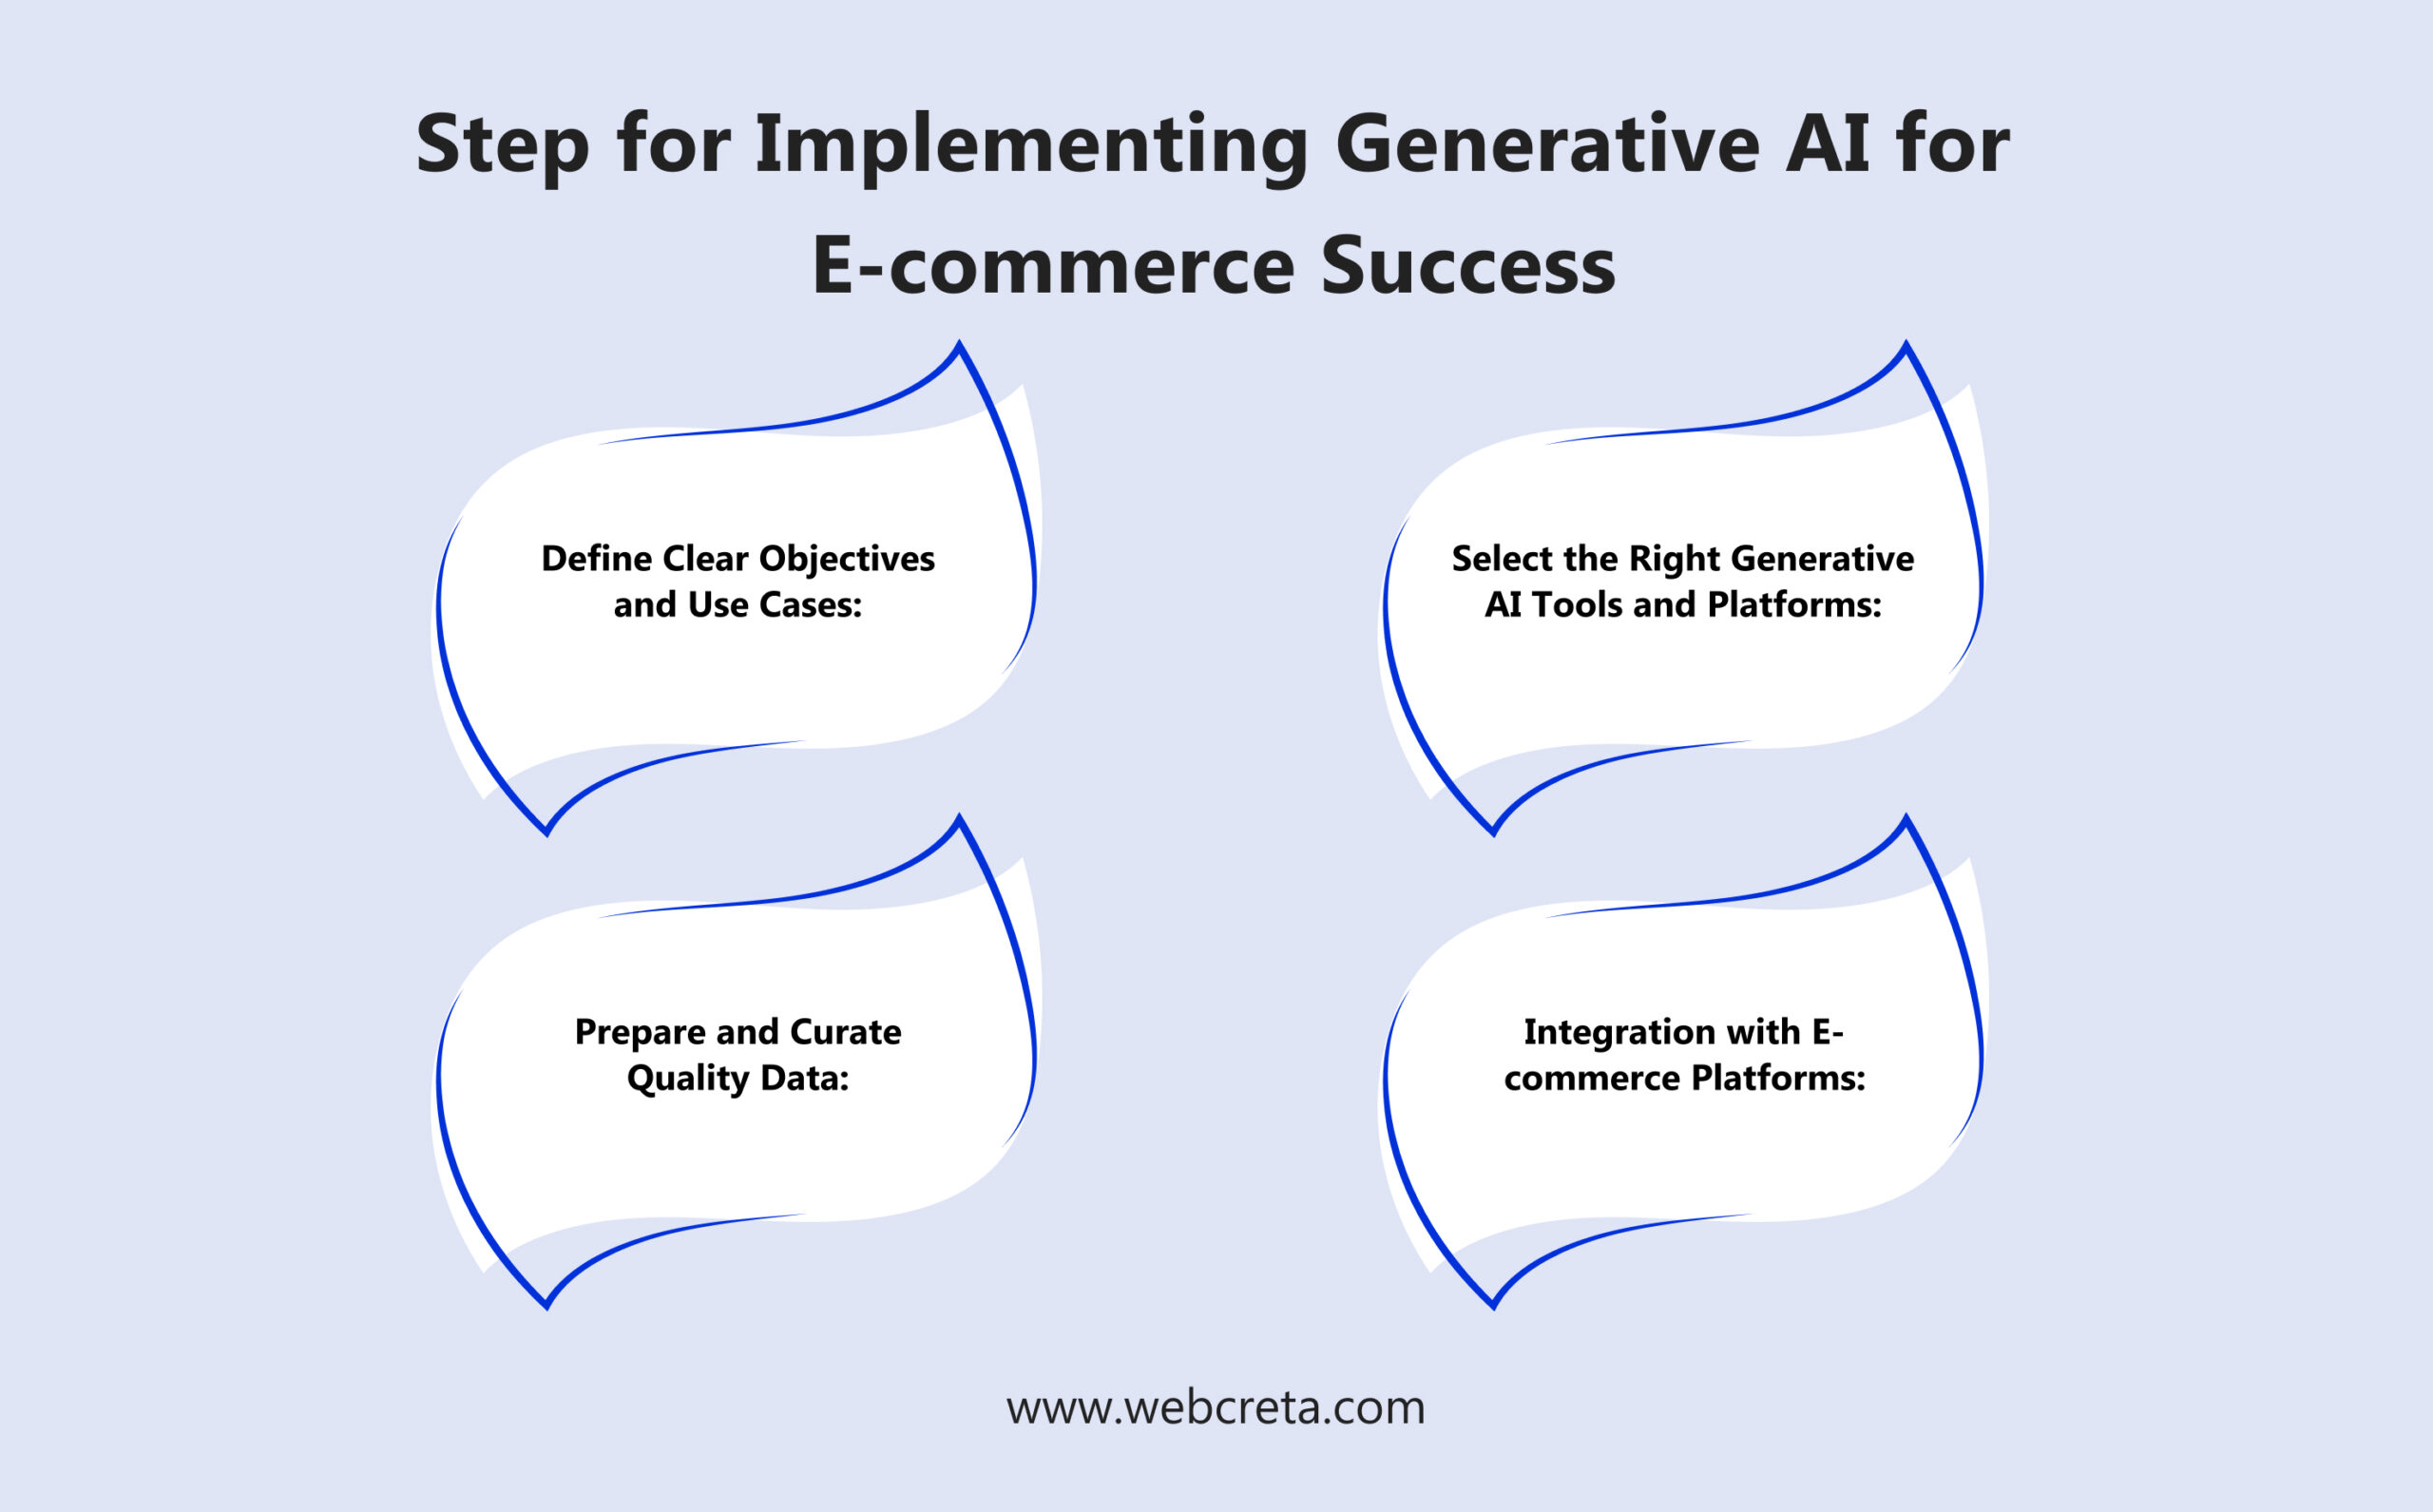 Step for Implementing Generative AI for E-commerce Success